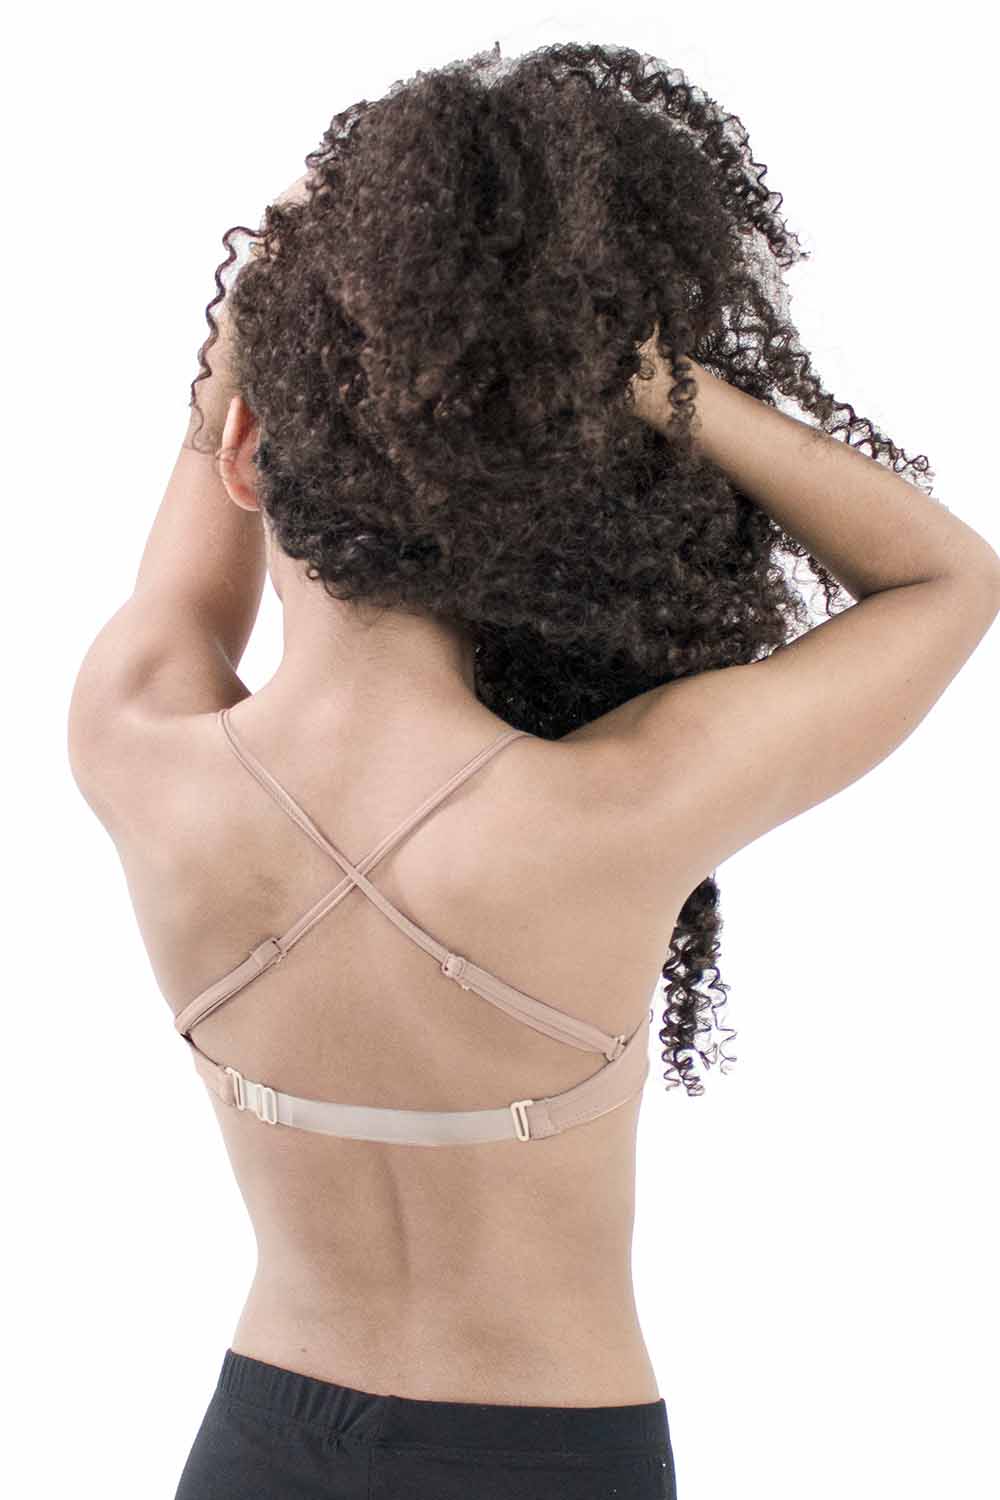 Seamless Clear Back Bra The Turning Pointe Boutique, Clear Straps